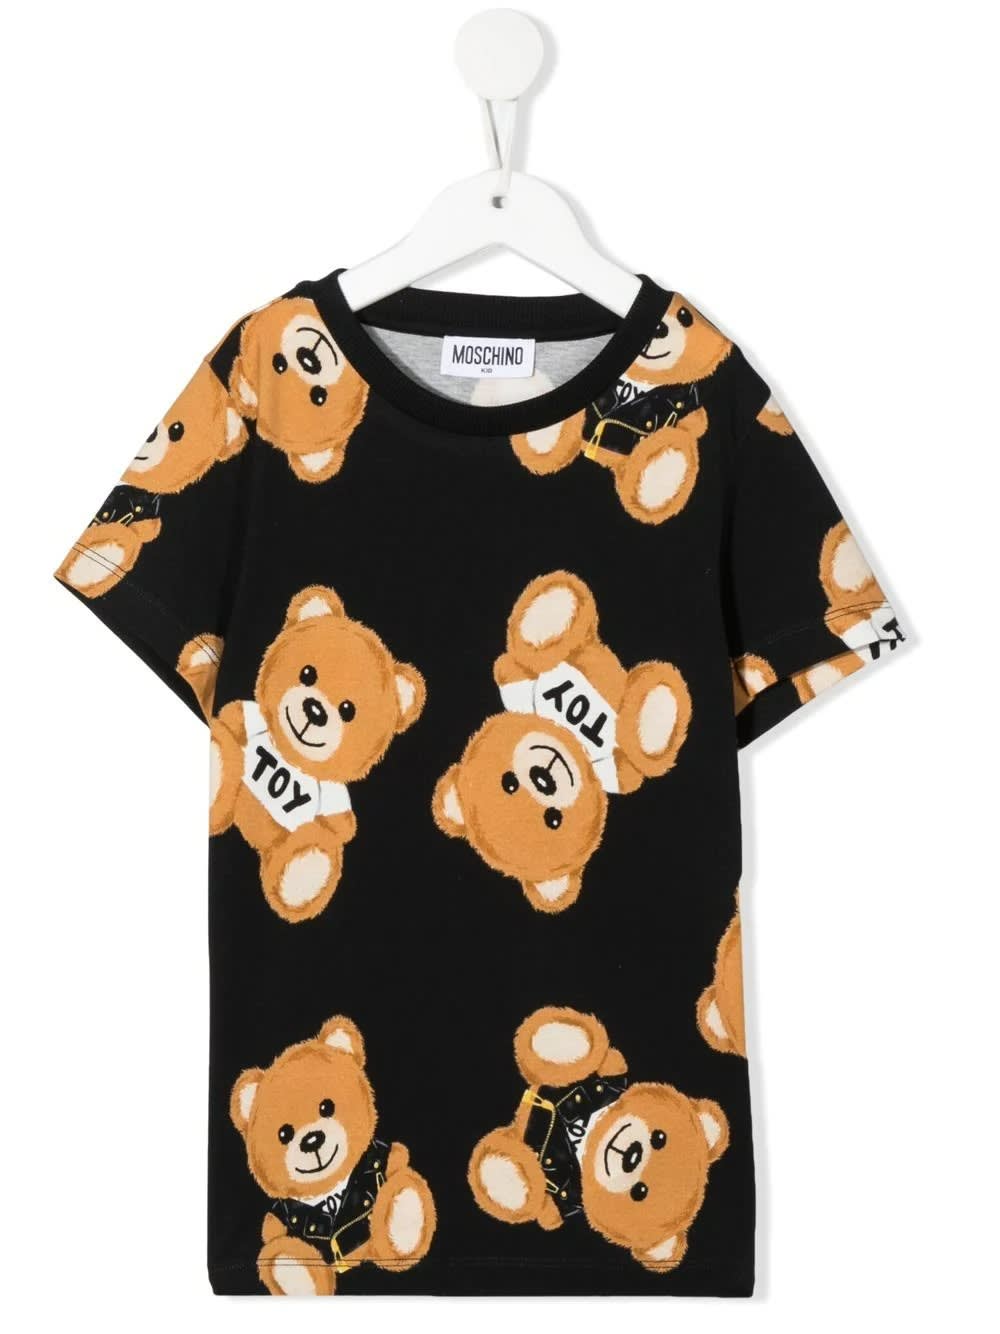 Kids Black T-shirt With All-over Moschino Teddy Bear Print